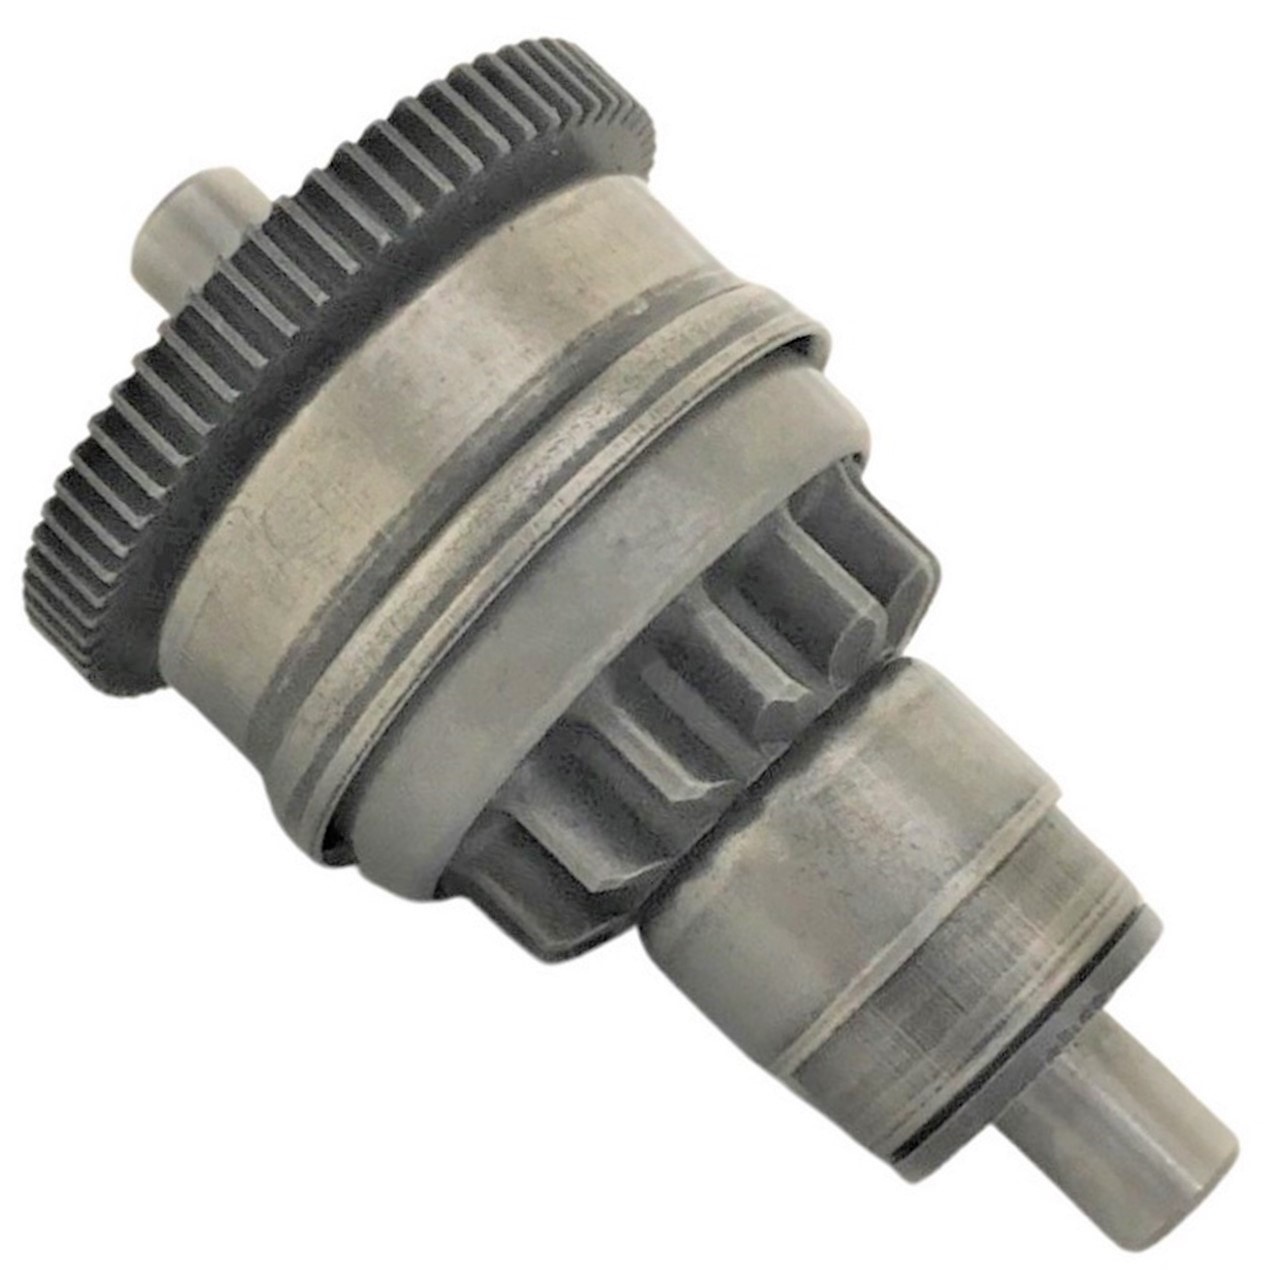 Starter Bendix Fits GY6-50 QMB139 49cc Scooters - Click Image to Close